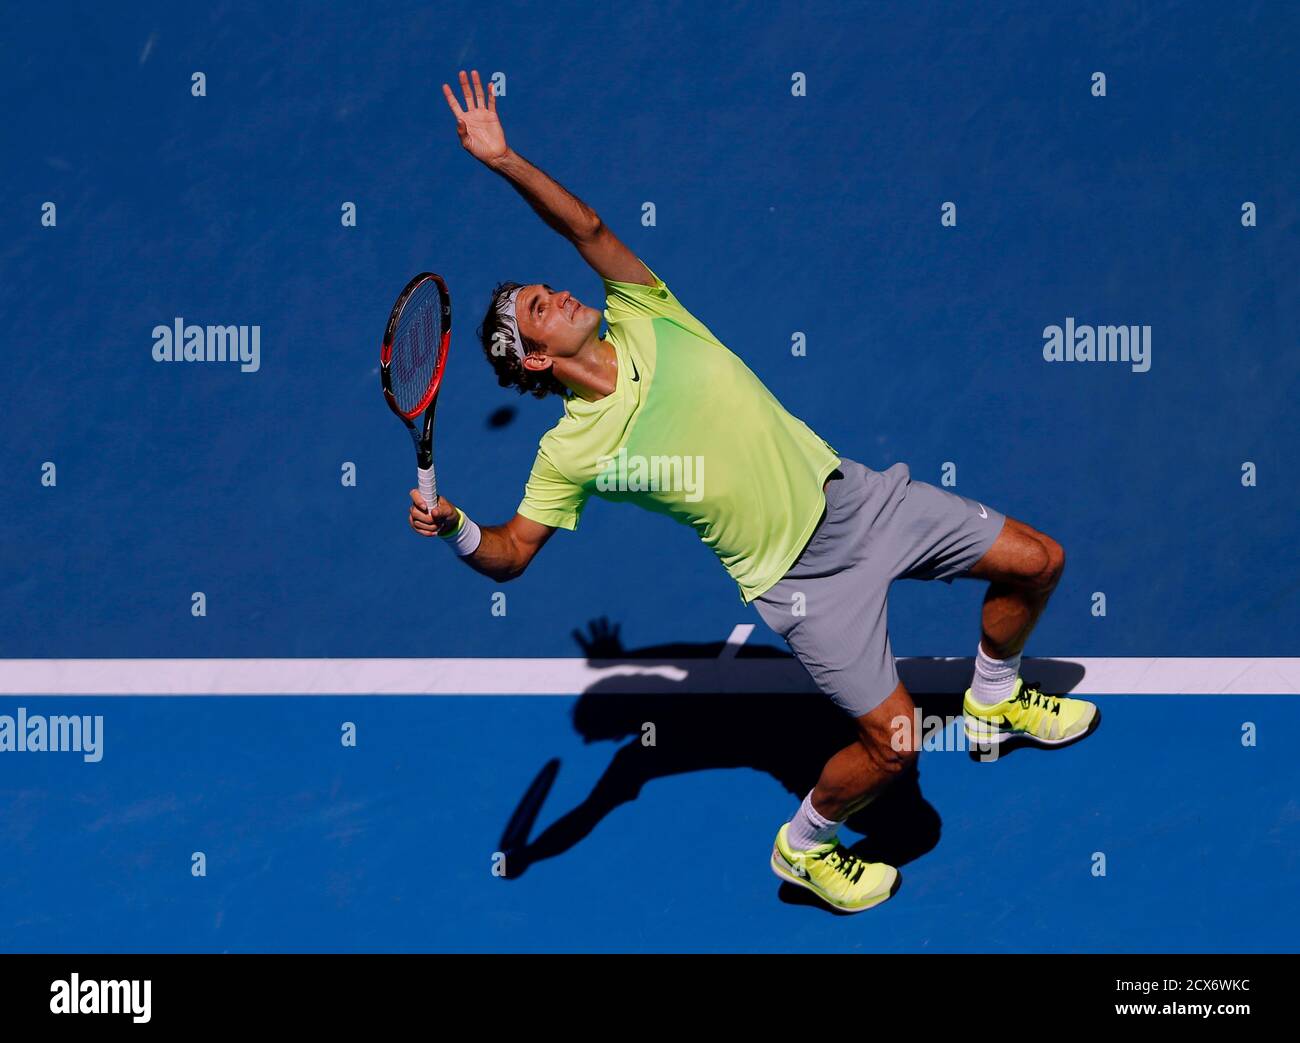 Roger Federer of Switzerland casts a shadow as he serves to Andreas Seppi  of Italy during their men's singles third round match at the Australian  Open 2015 tennis tournament in Melbourne January